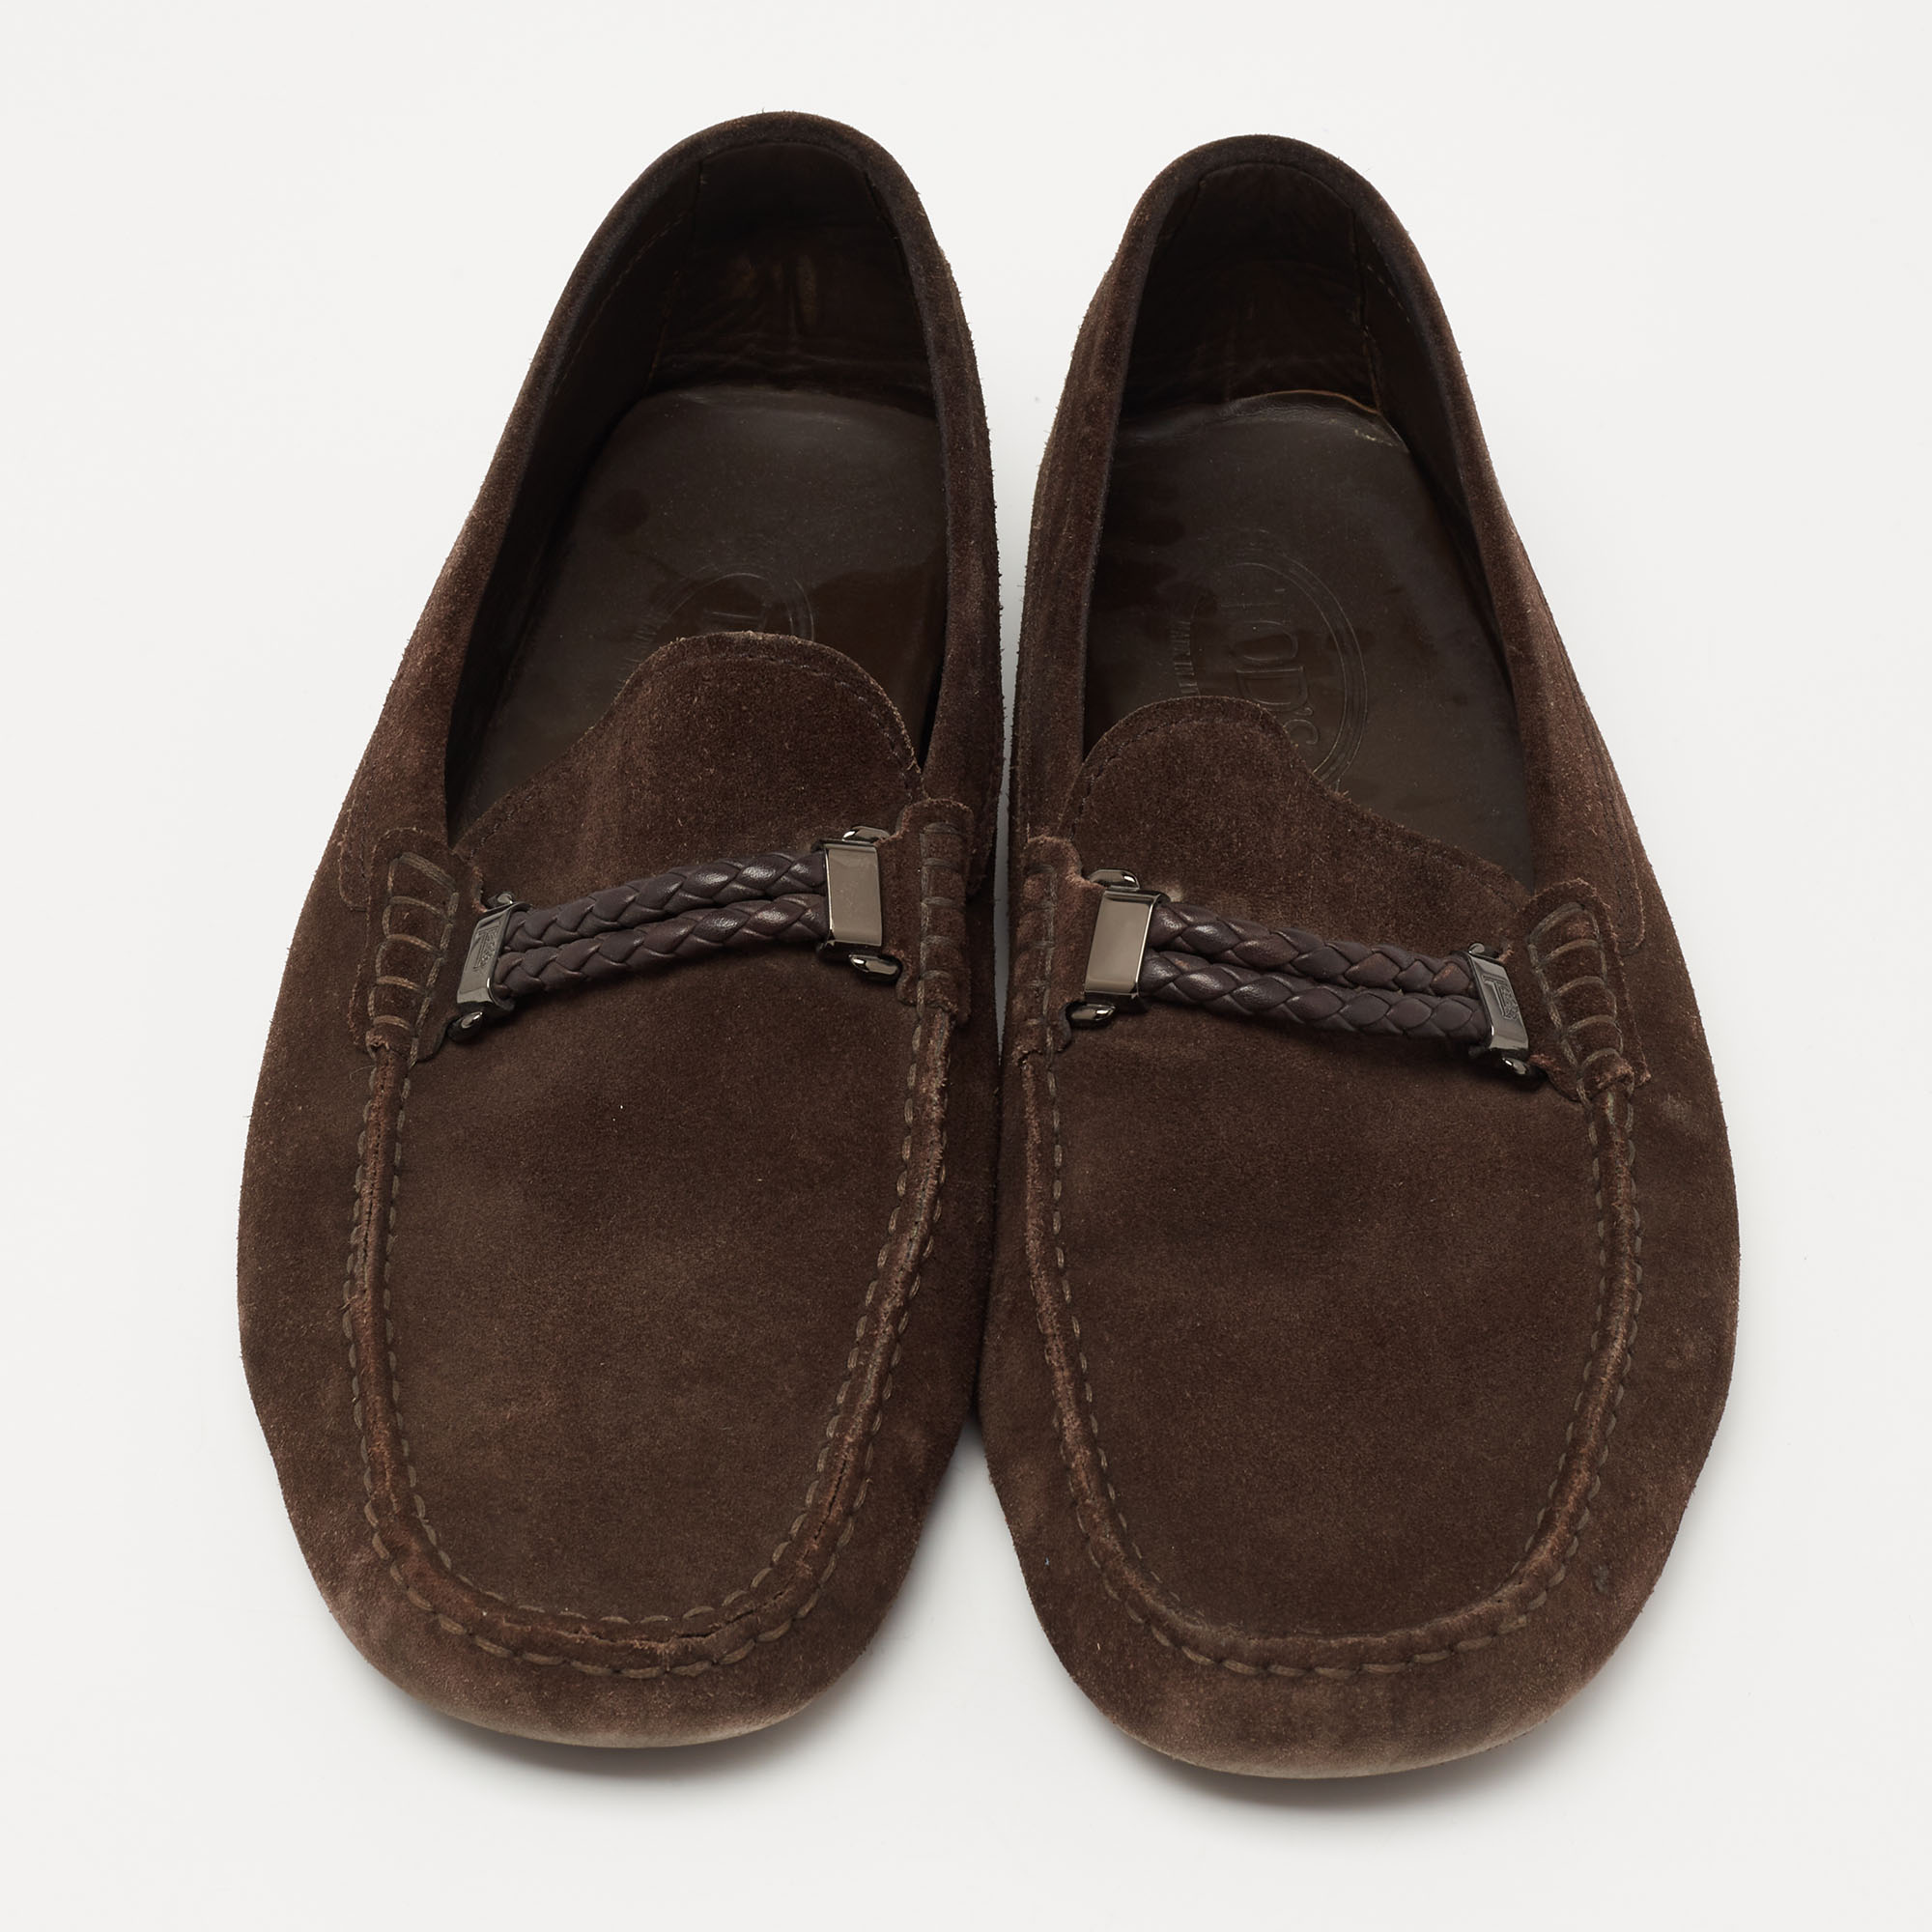 Tod's Dark Brown Suede Slip On Loafers Size 44.5